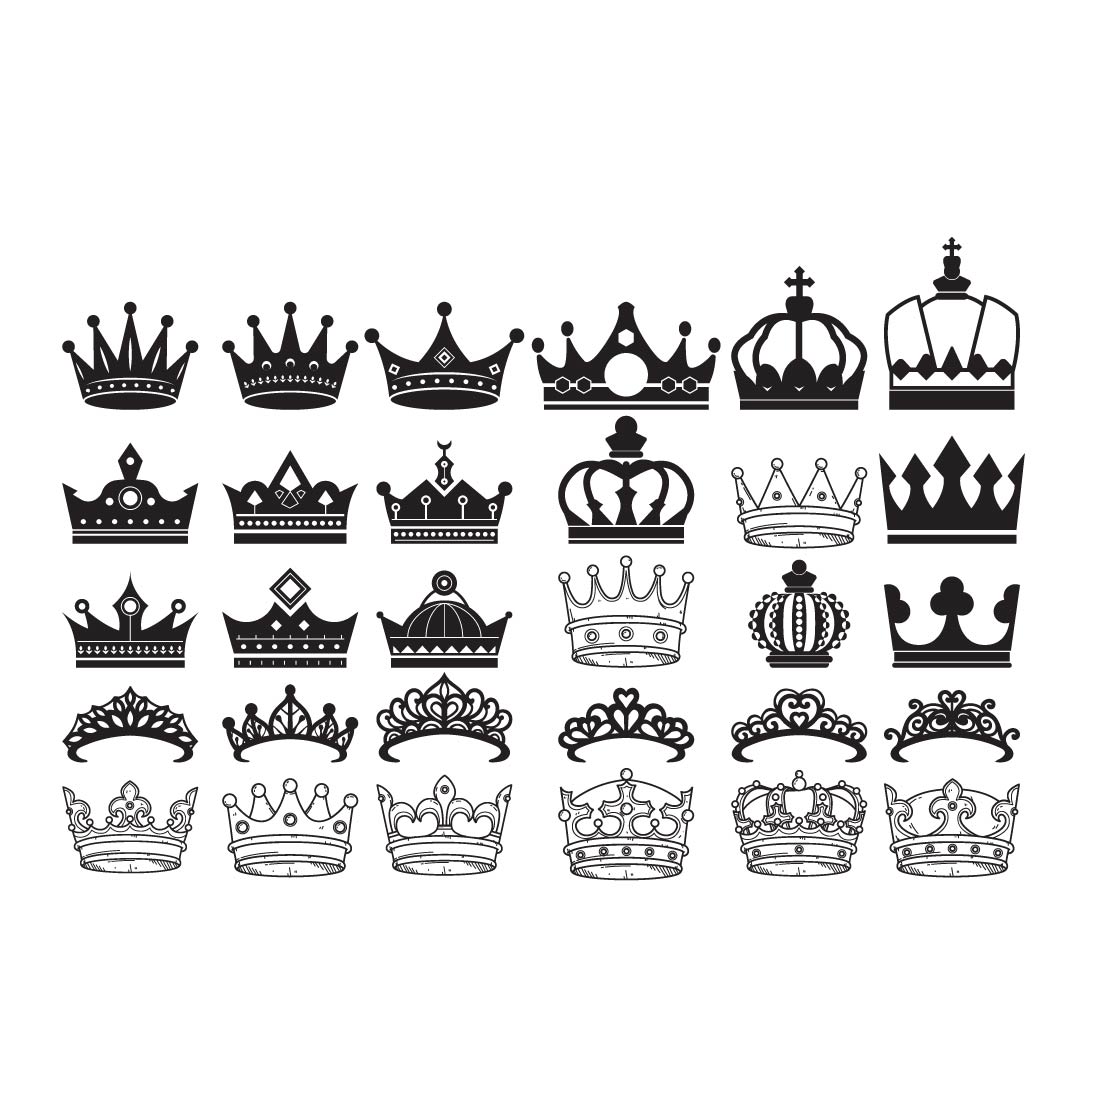 Royal Crown SVG File, King Crown SVG, Queen Crown SVG, Princess Tiara Svg, For Silhouette Png, Dxf, Cut files for cricut, instant download preview image.